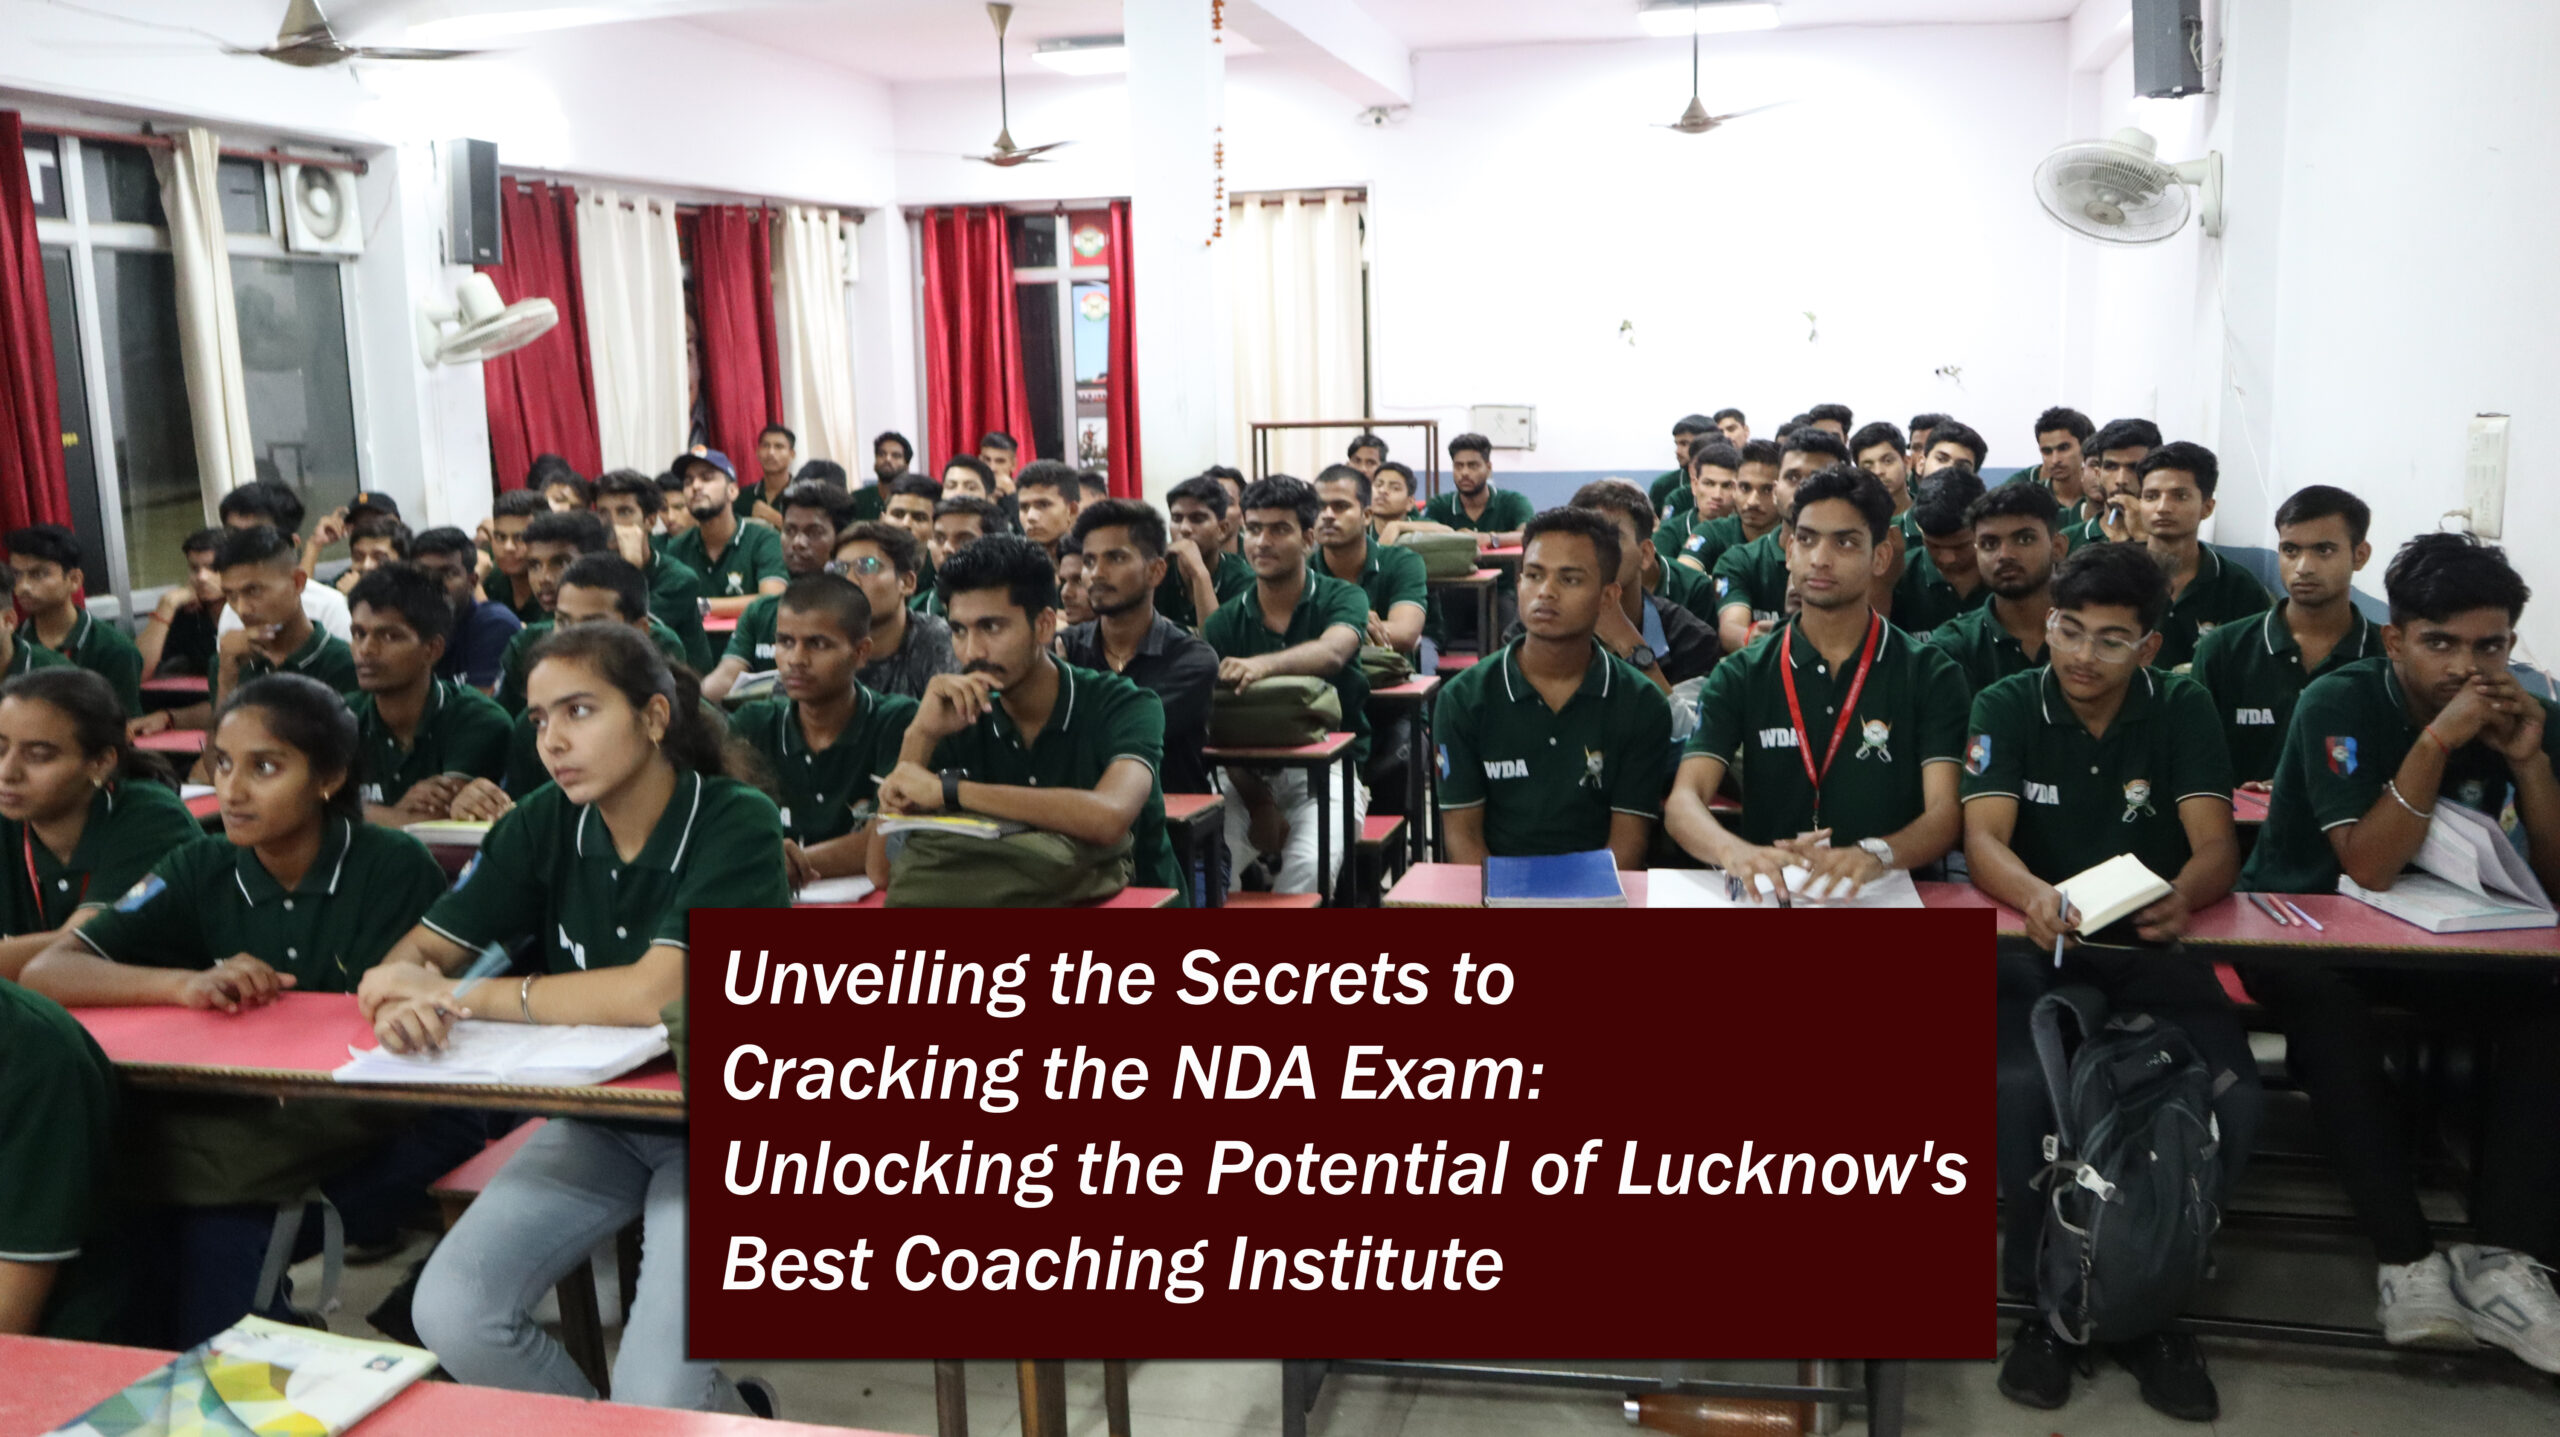 Unveiling the Secrets to Cracking the NDA Exam Unlocking the Potential of Lucknow's Best Coaching Institute